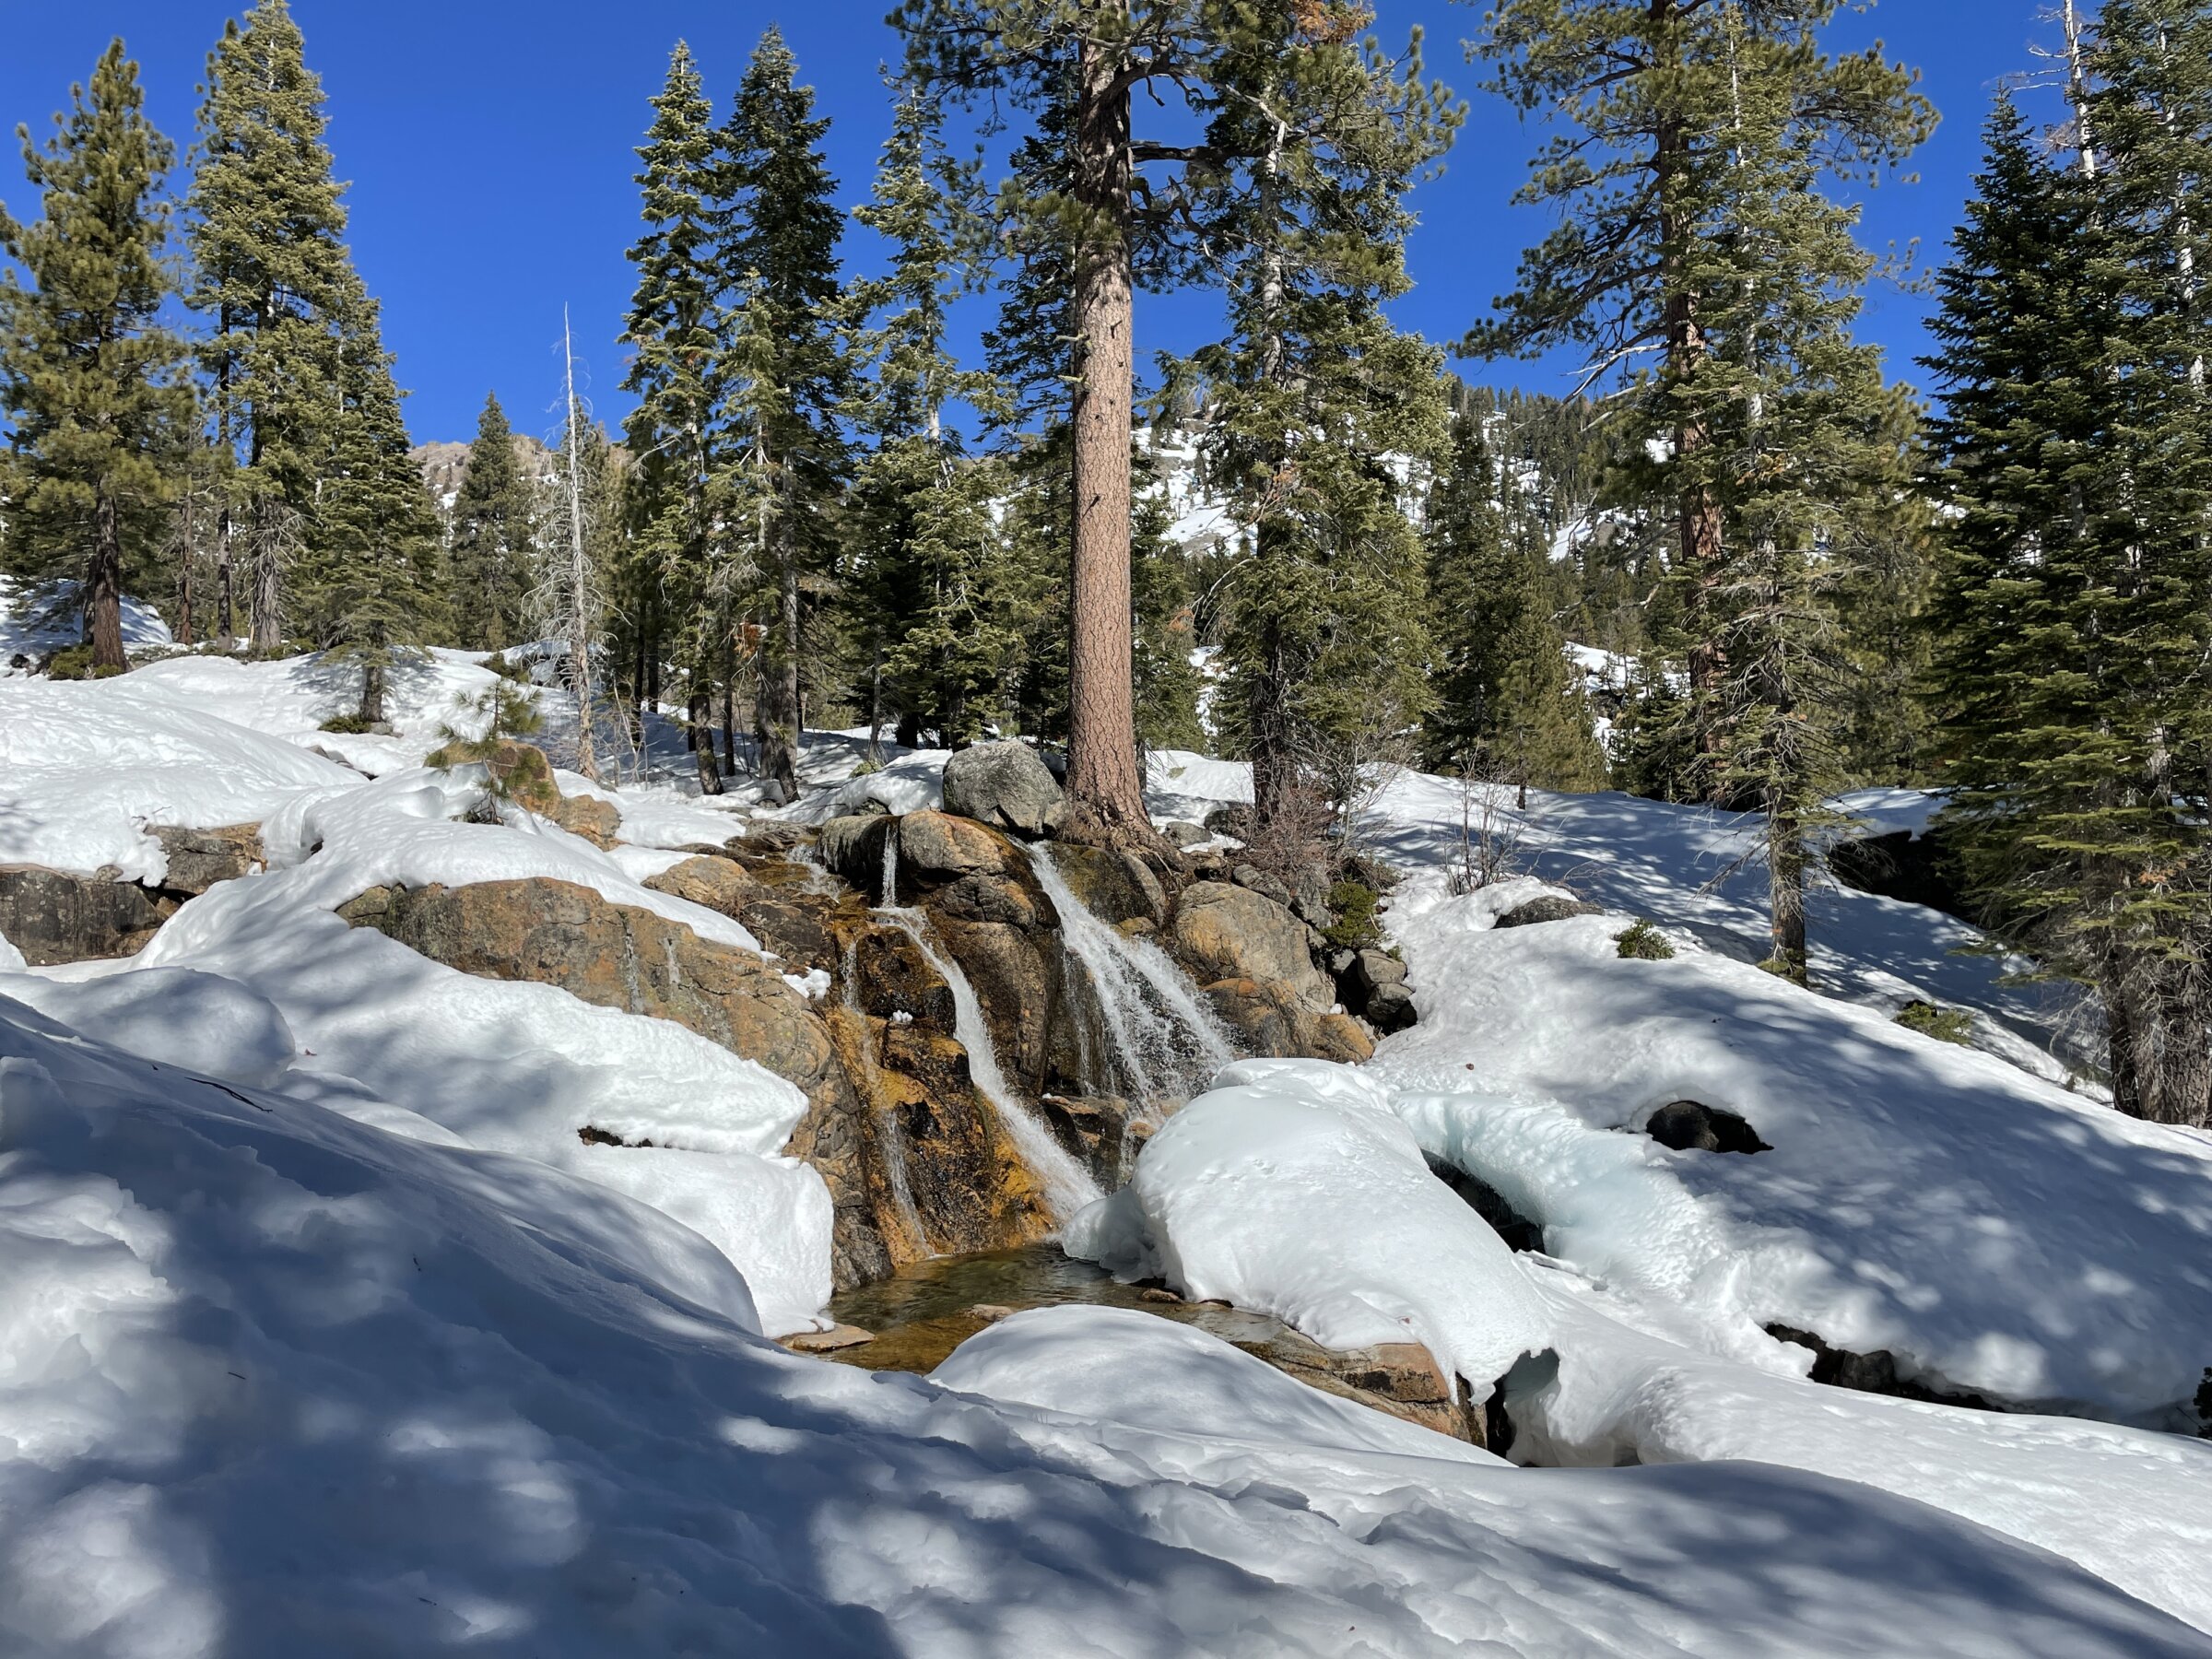 Professionally guided North Lake Tahoe Snowshoe Tour